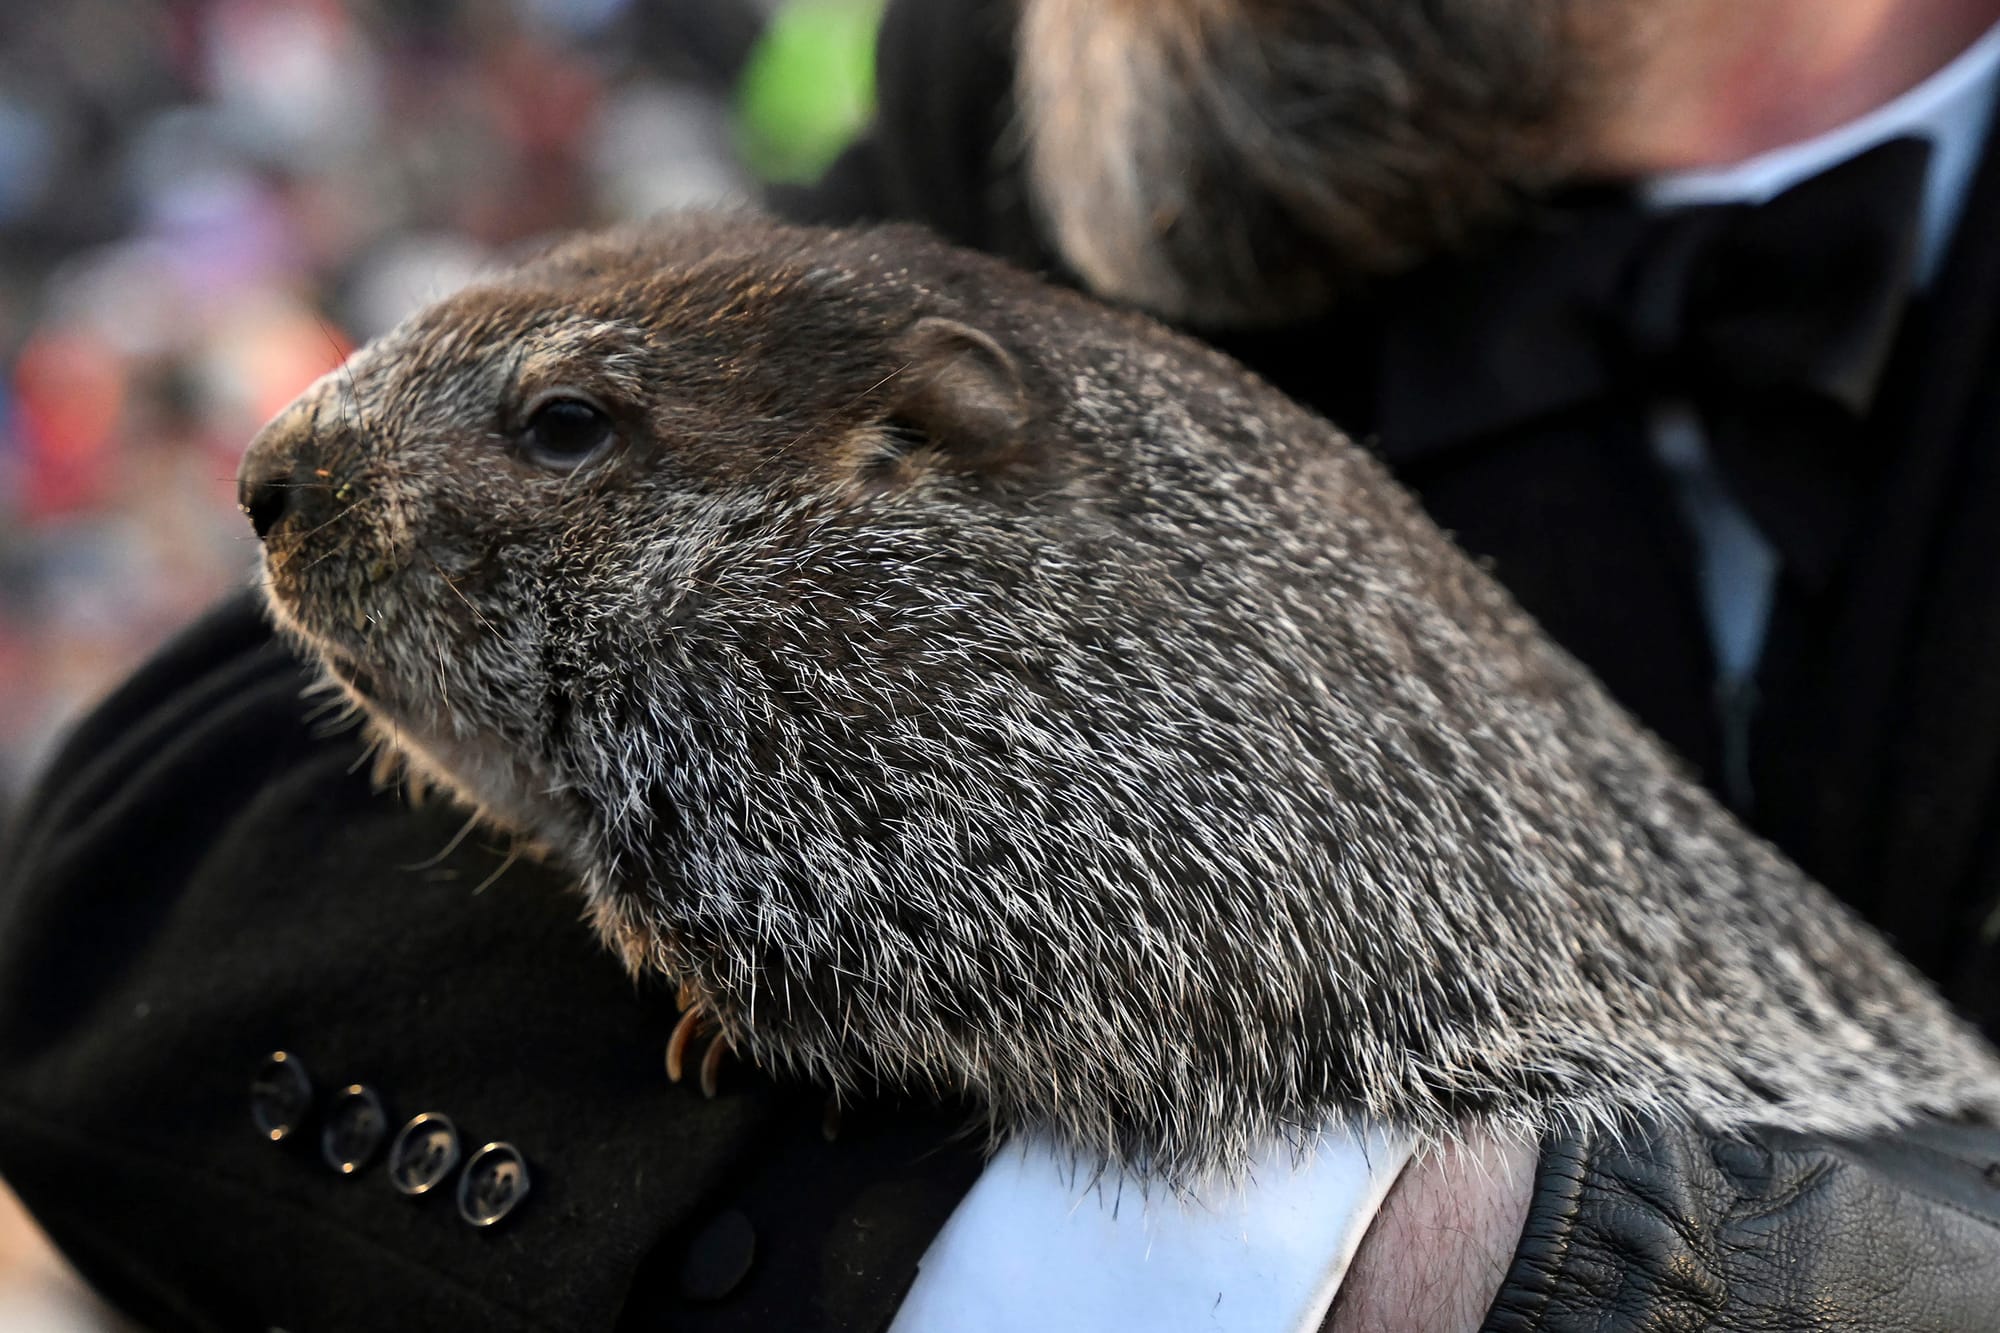 Spring Fever Alert: Punxsutawney Phil Foresees an Early Thaw!